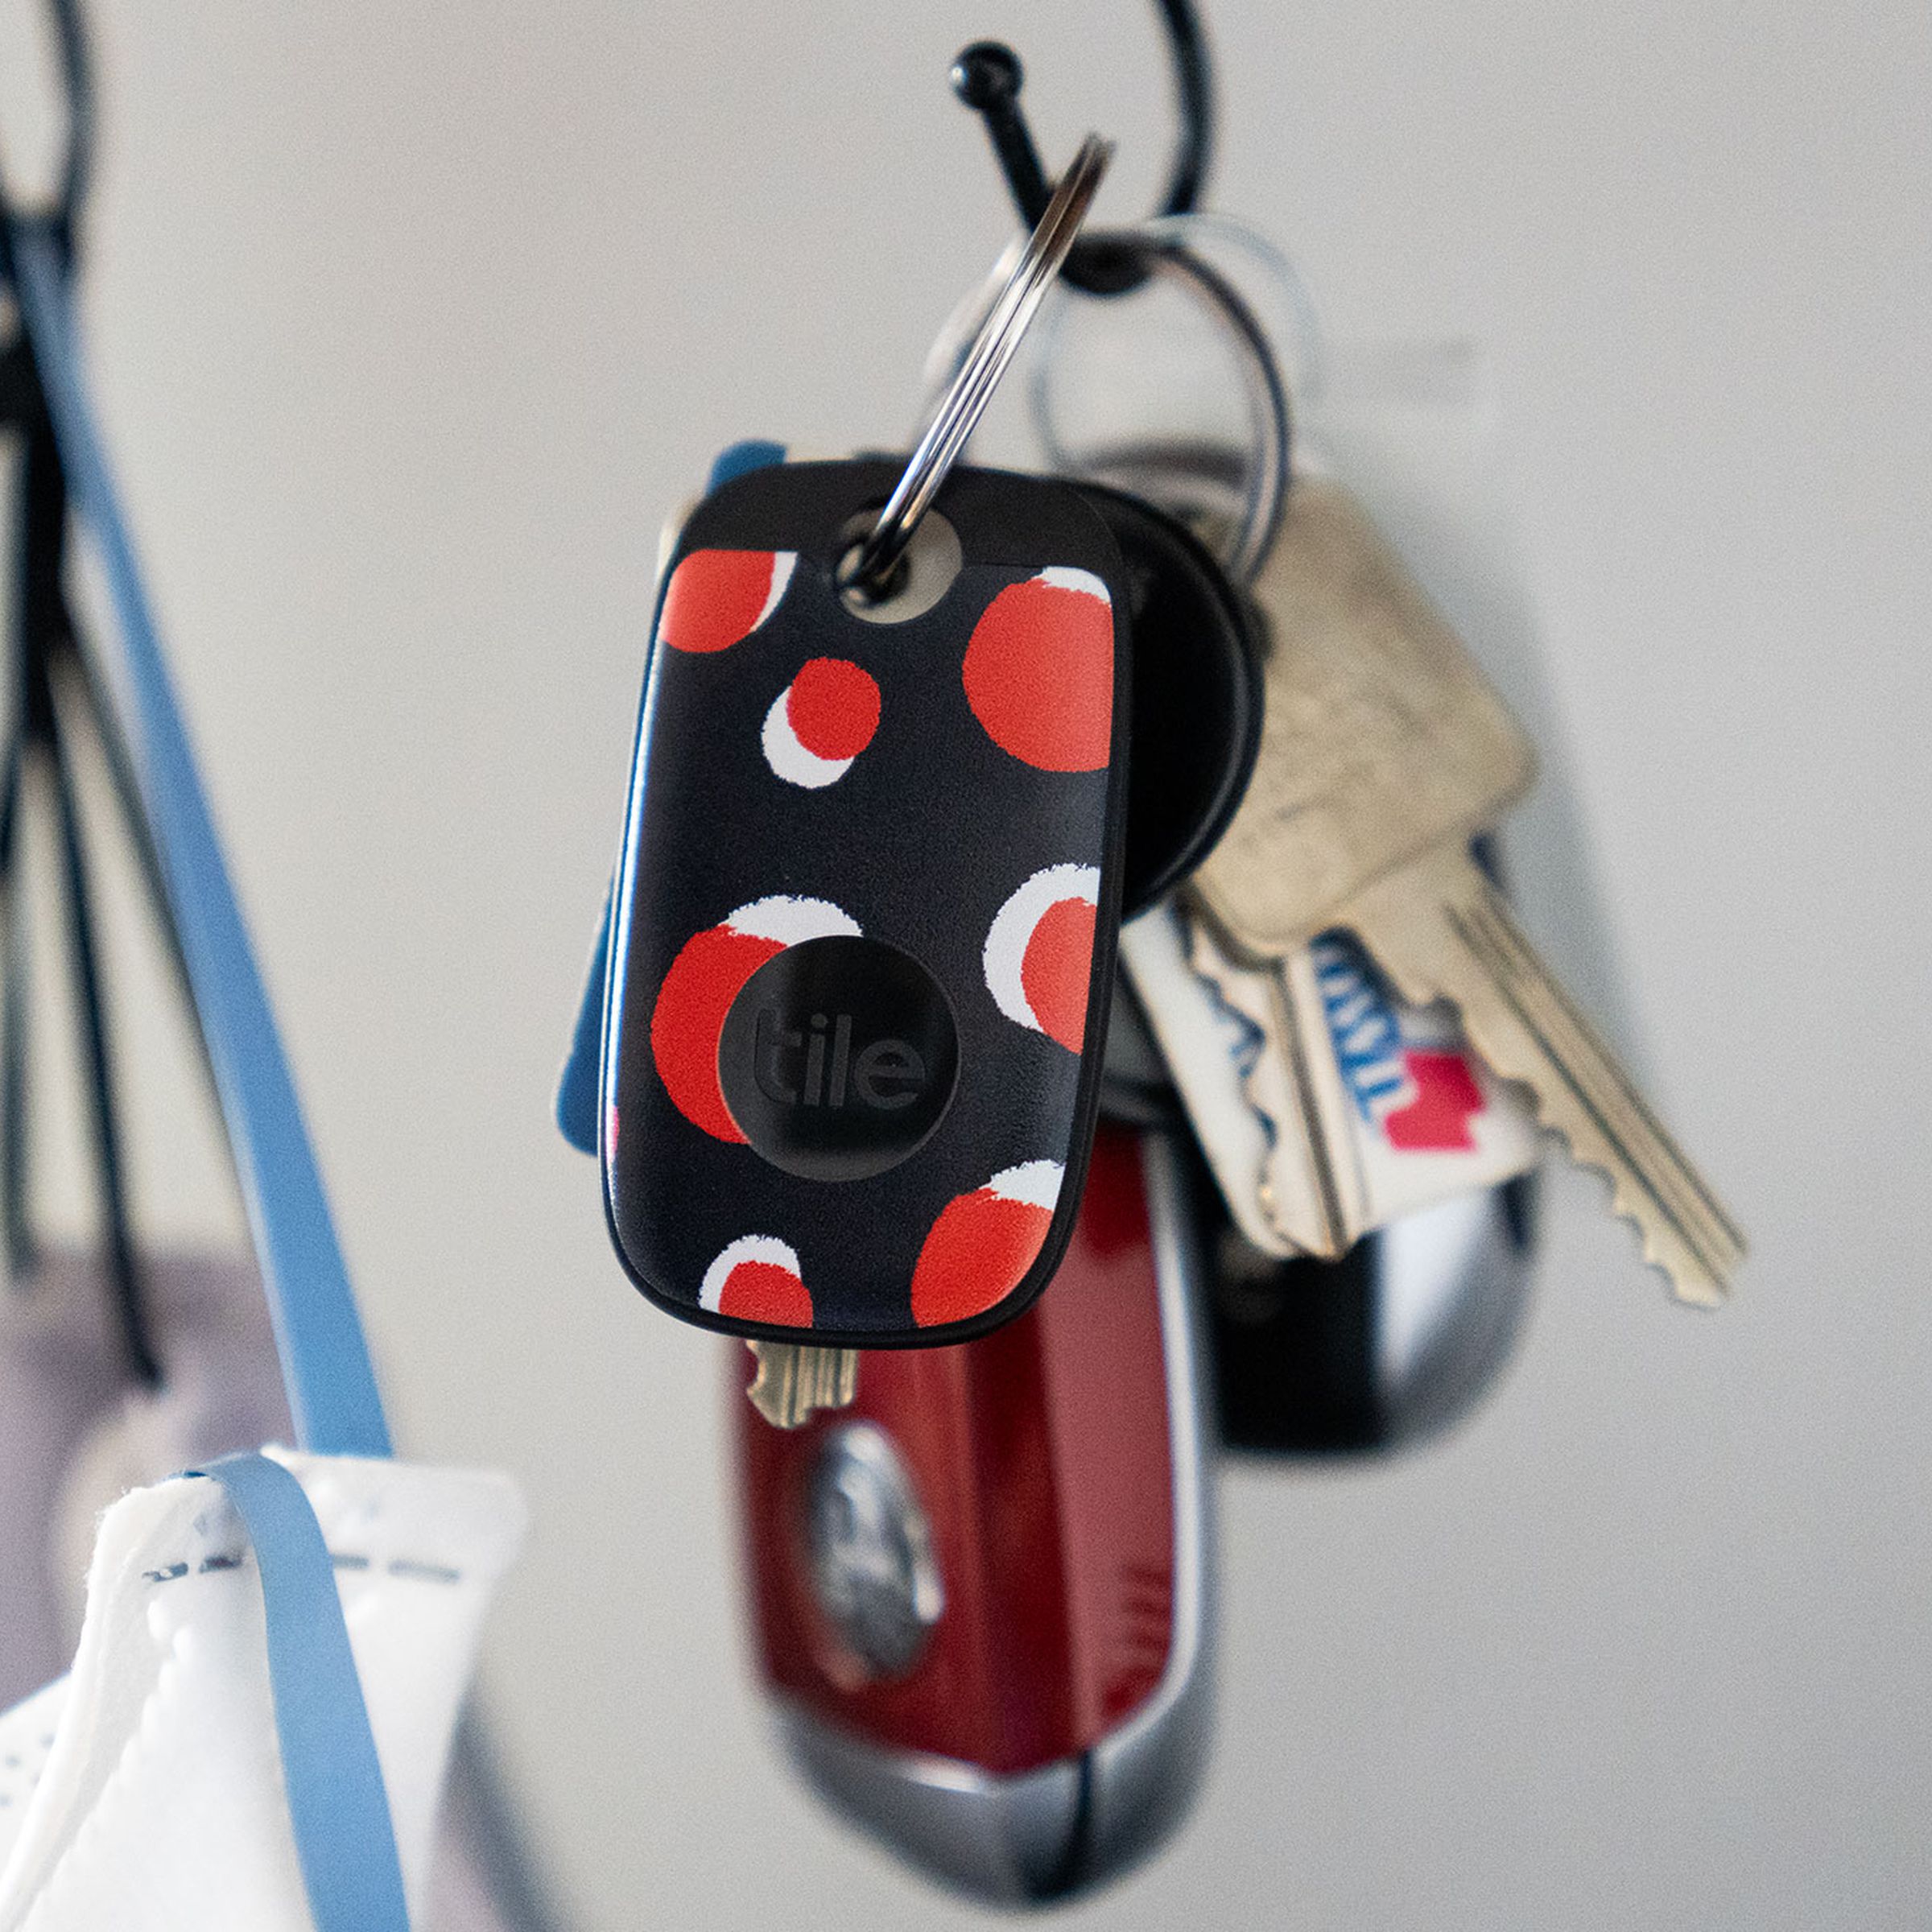 Colorful Tile Pro hanging from a key ring on a hook